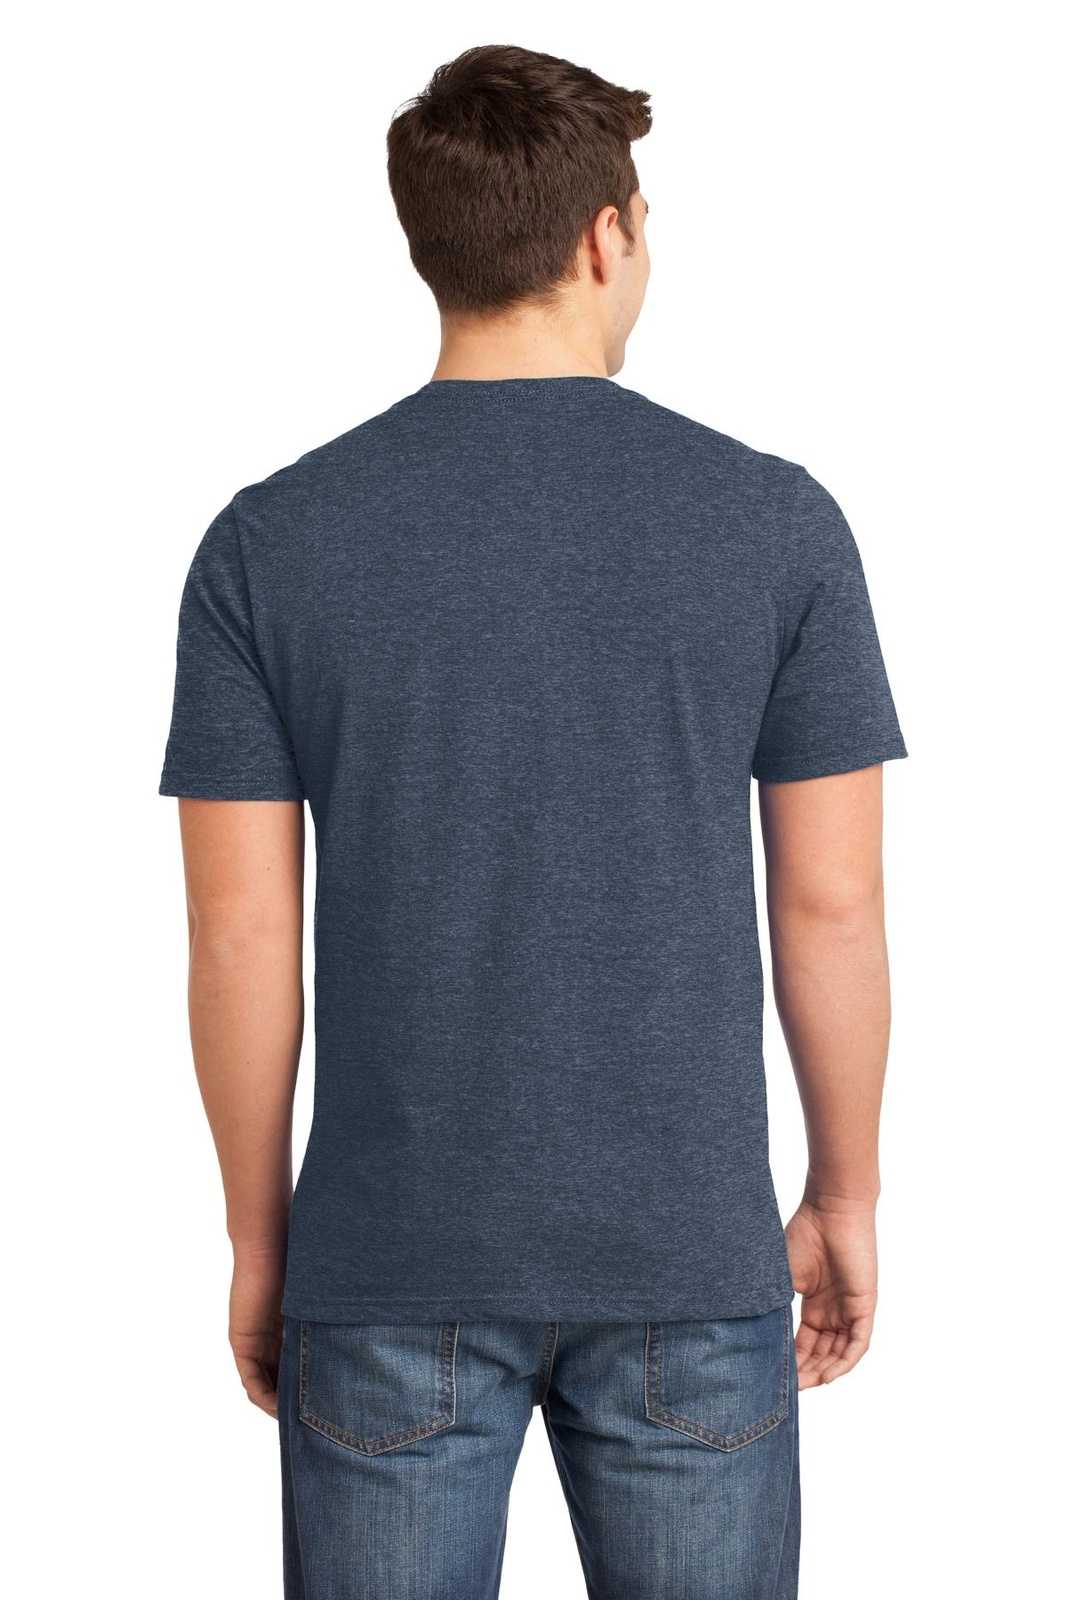 District DT6000 Very Important Tee - Heathered Navy - HIT a Double - 2